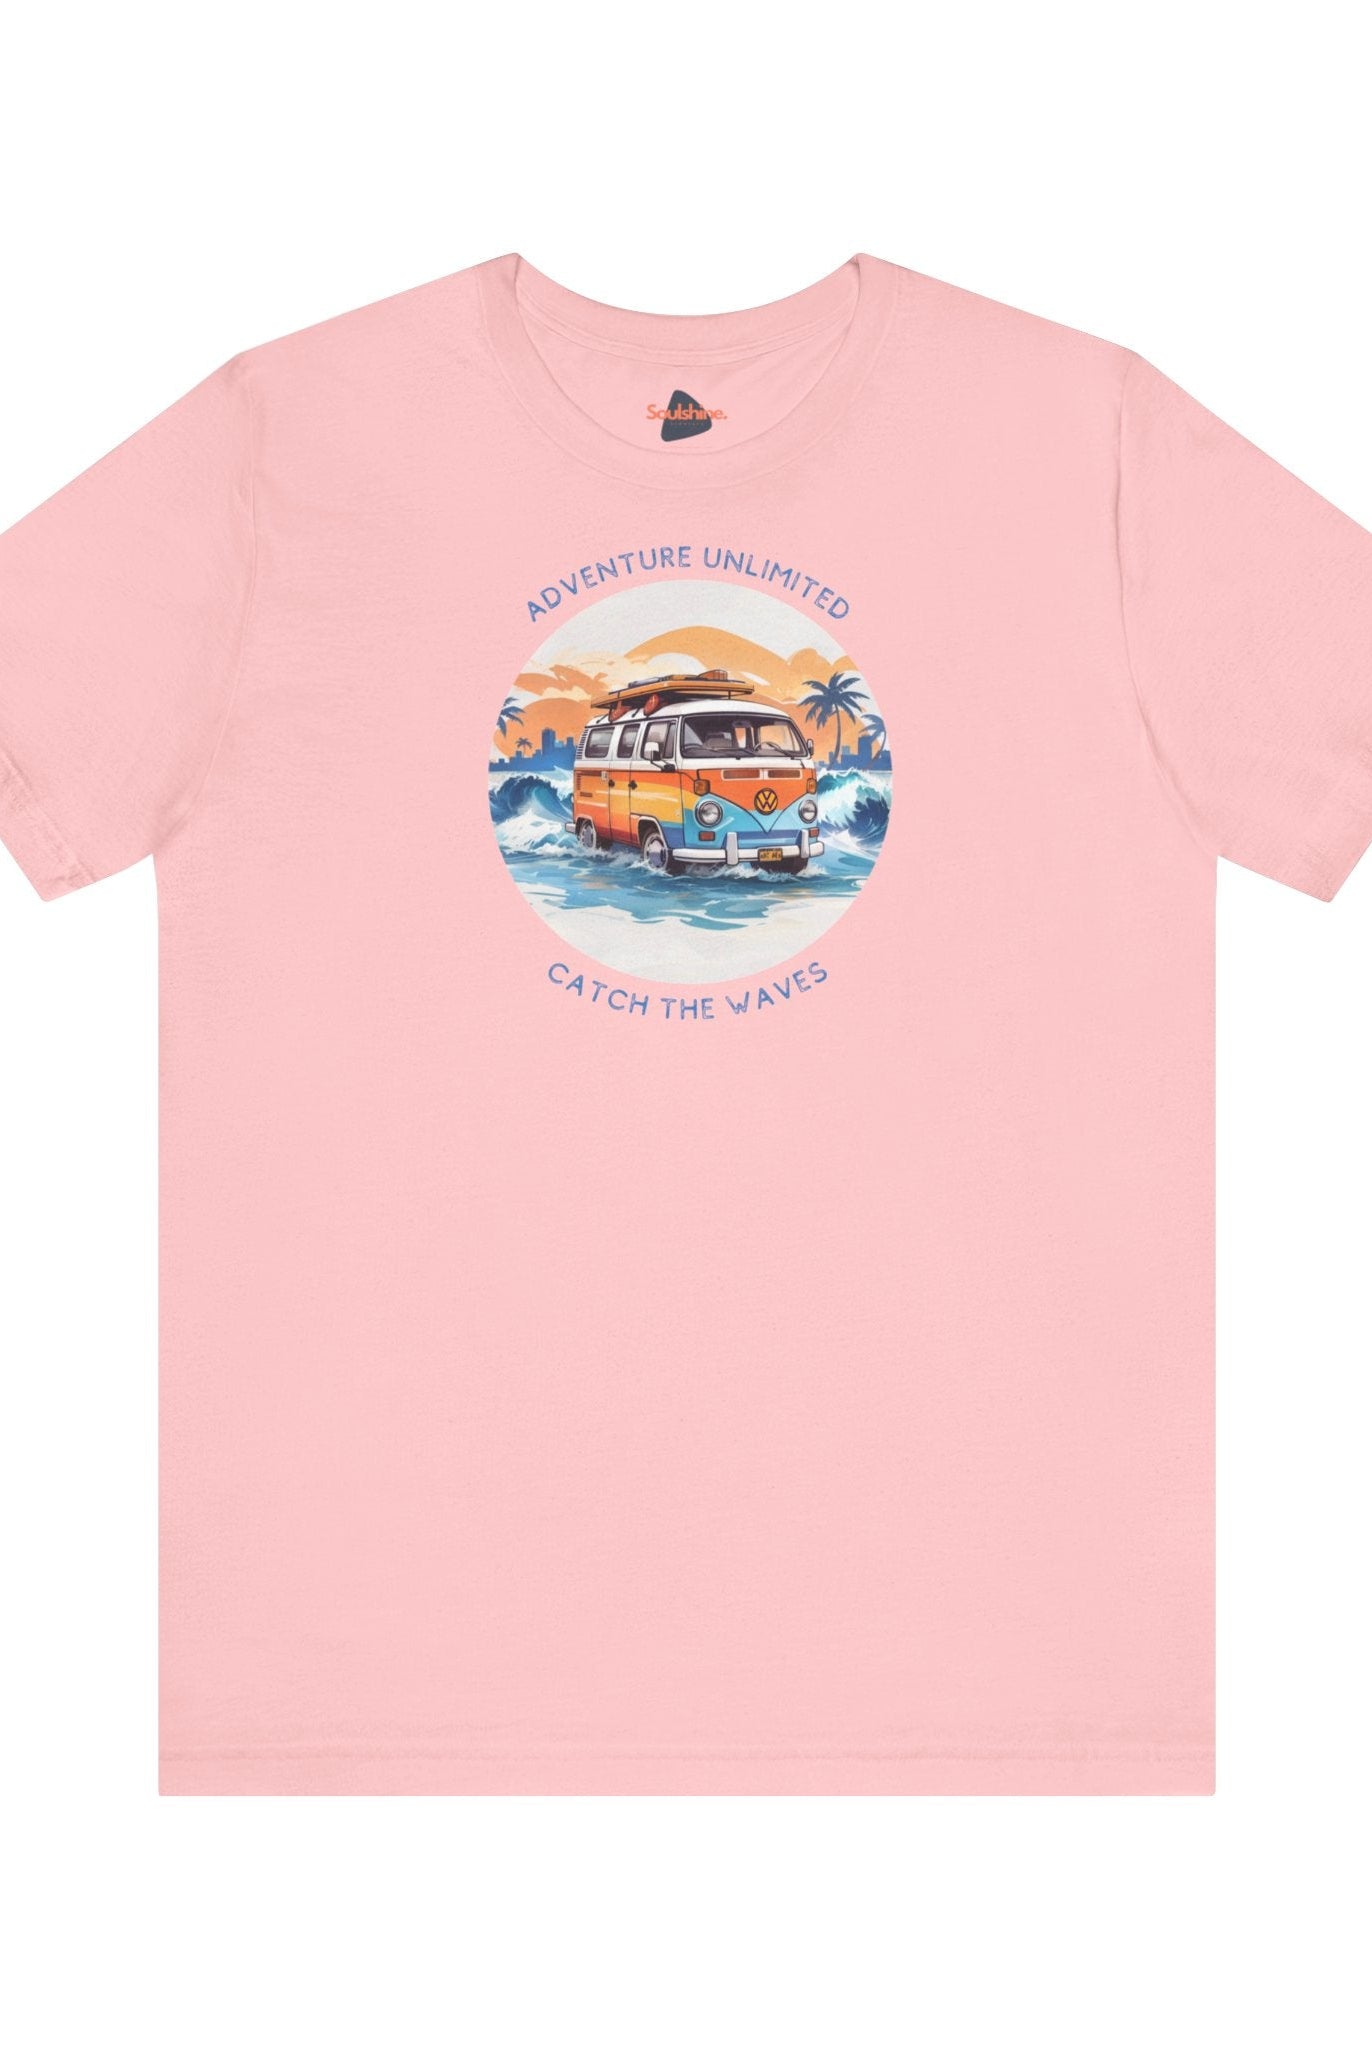 Printed pink t shirt with car graphic and Adventure Unlimited text on Bella & Canvas item